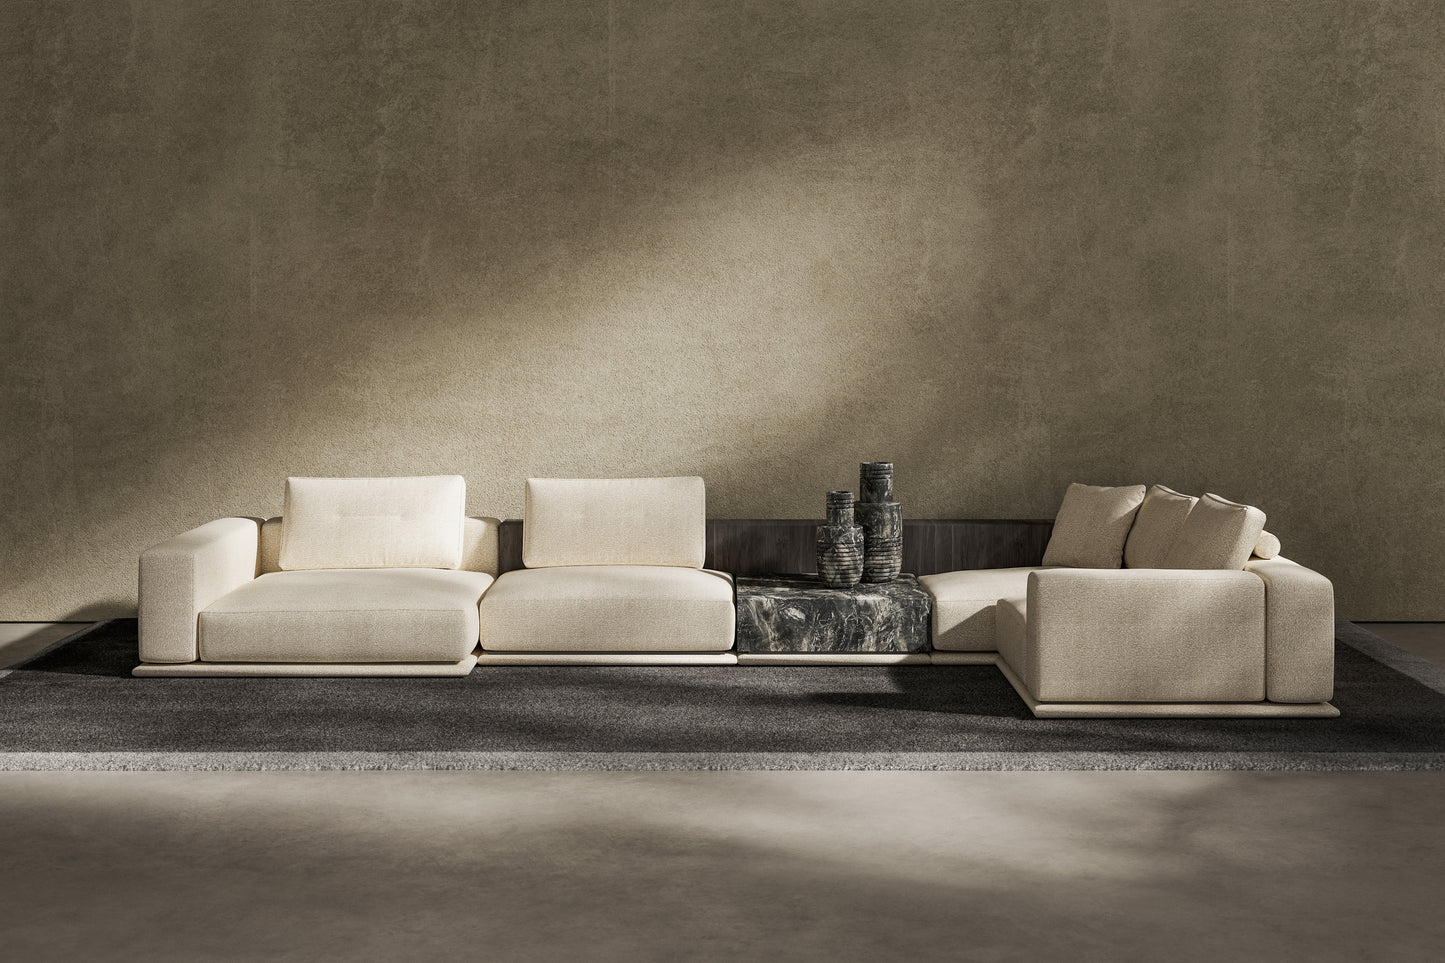 ISOLA SOFA | COLLECTION PIETRA CASA | QUOTE BY REQUEST